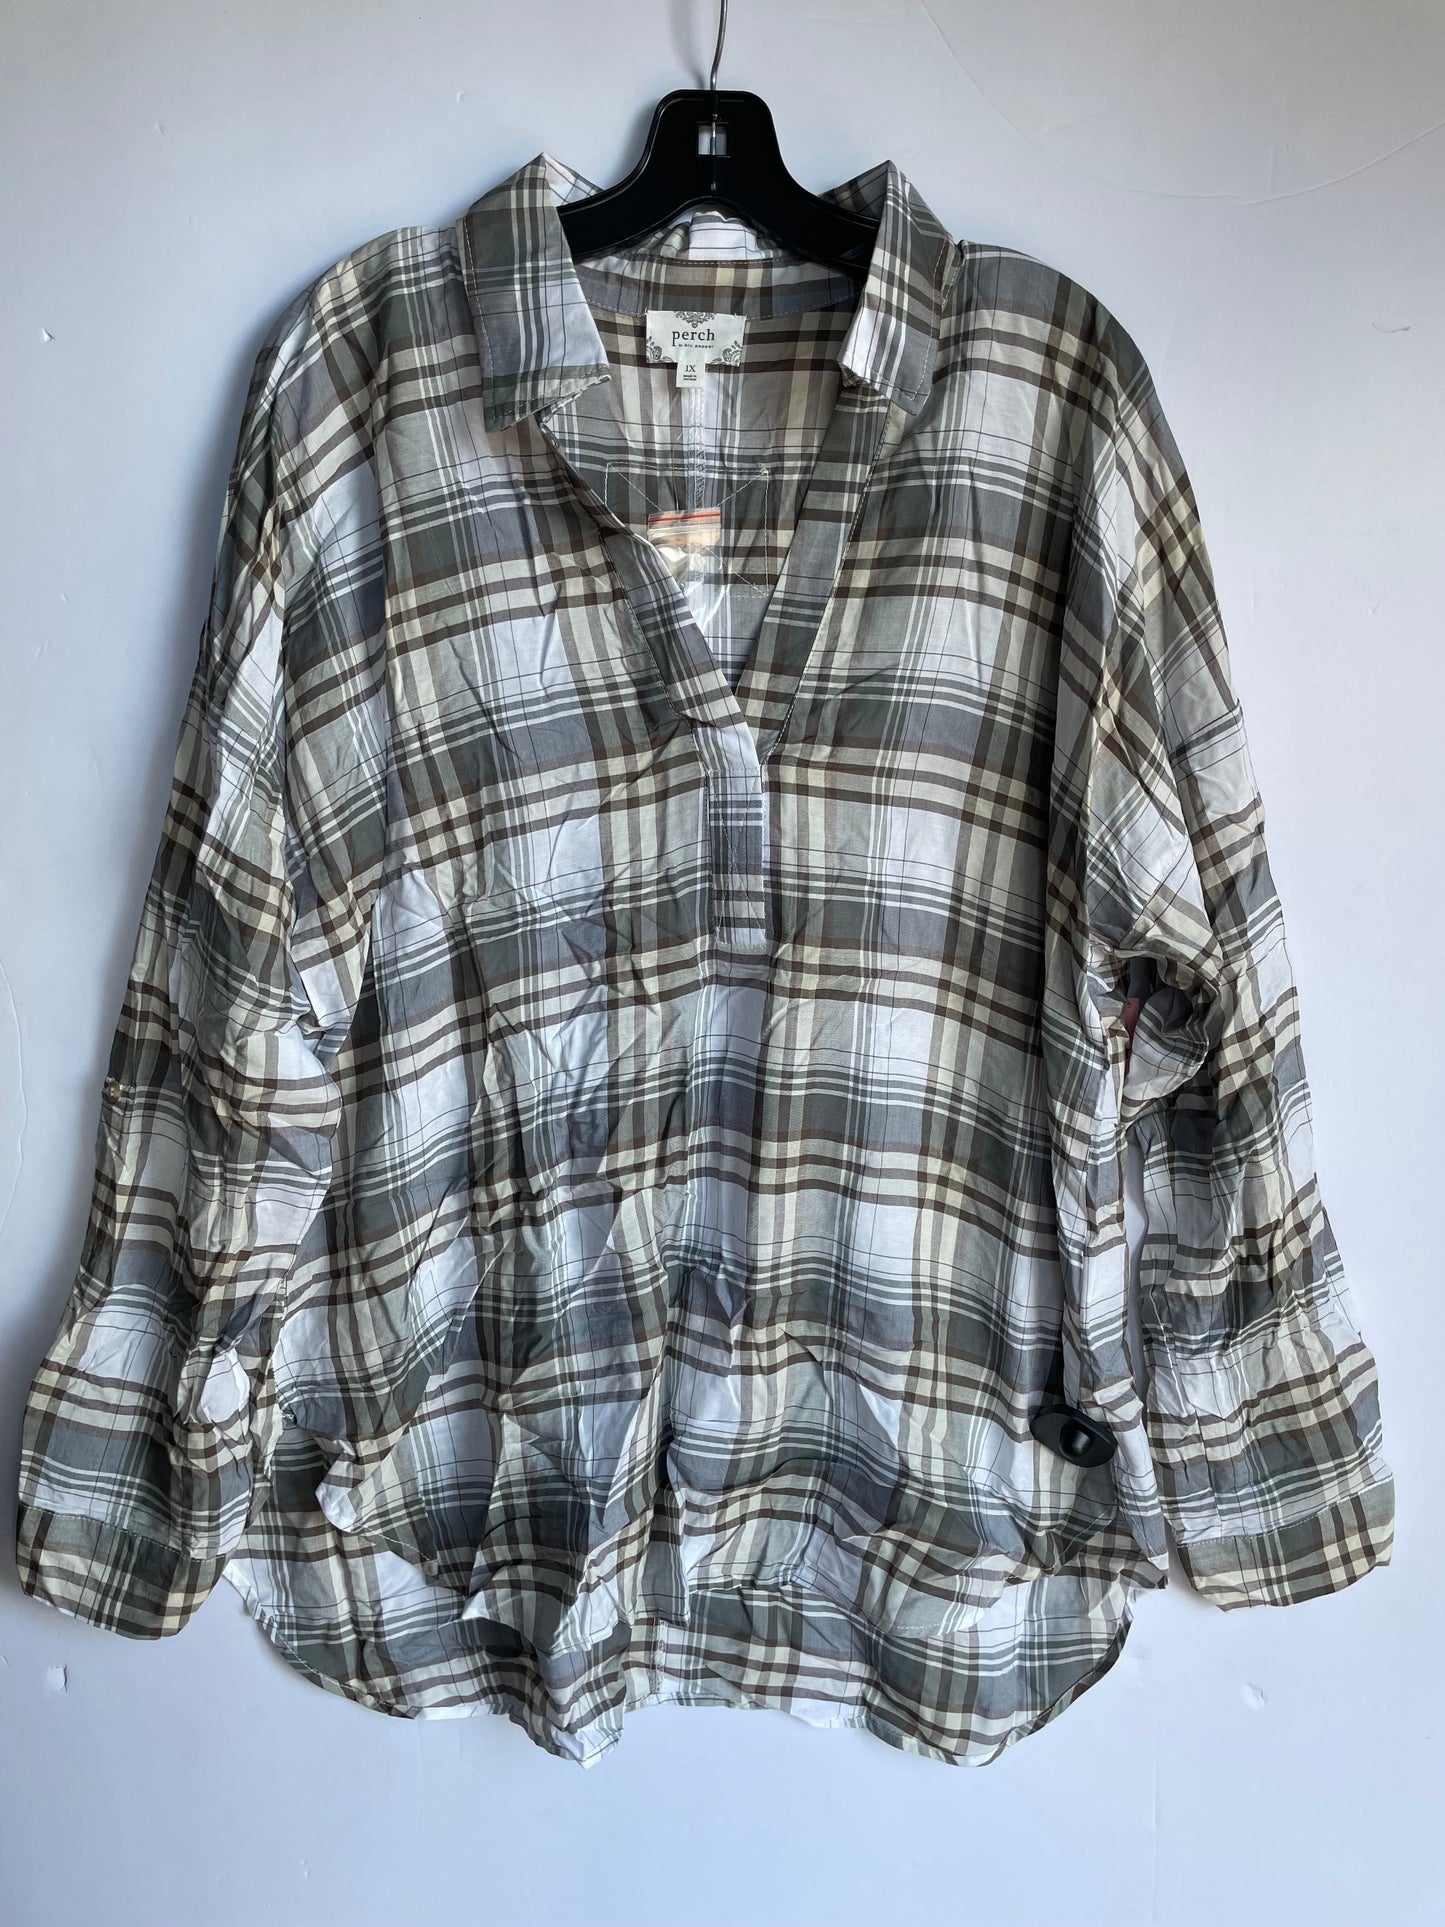 Plaid Pattern Top Long Sleeve Cme, Size 2x